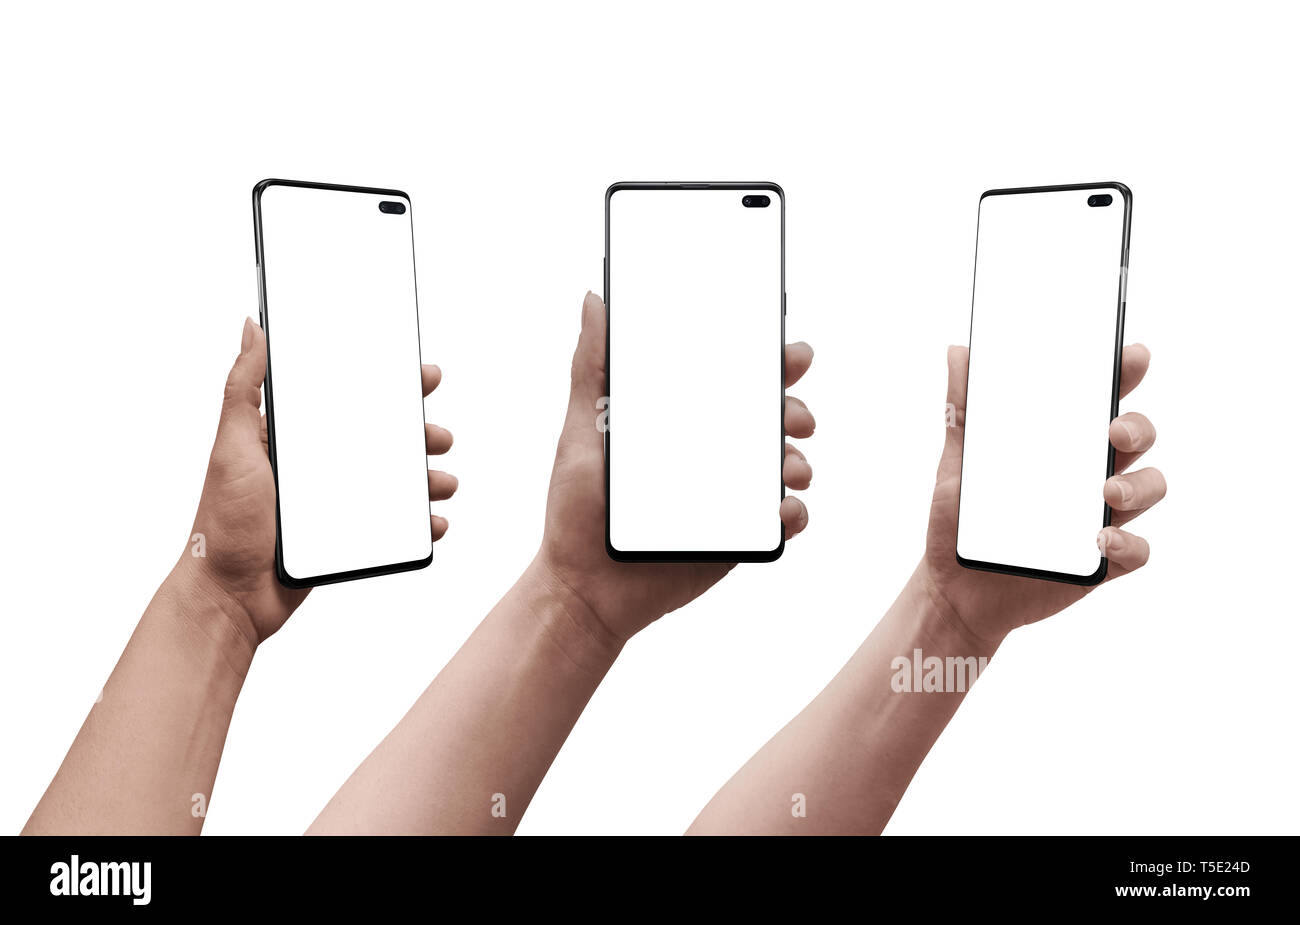 Smart phone in woman hand in three positions. Isolated display and background. Mockup. Stock Photo